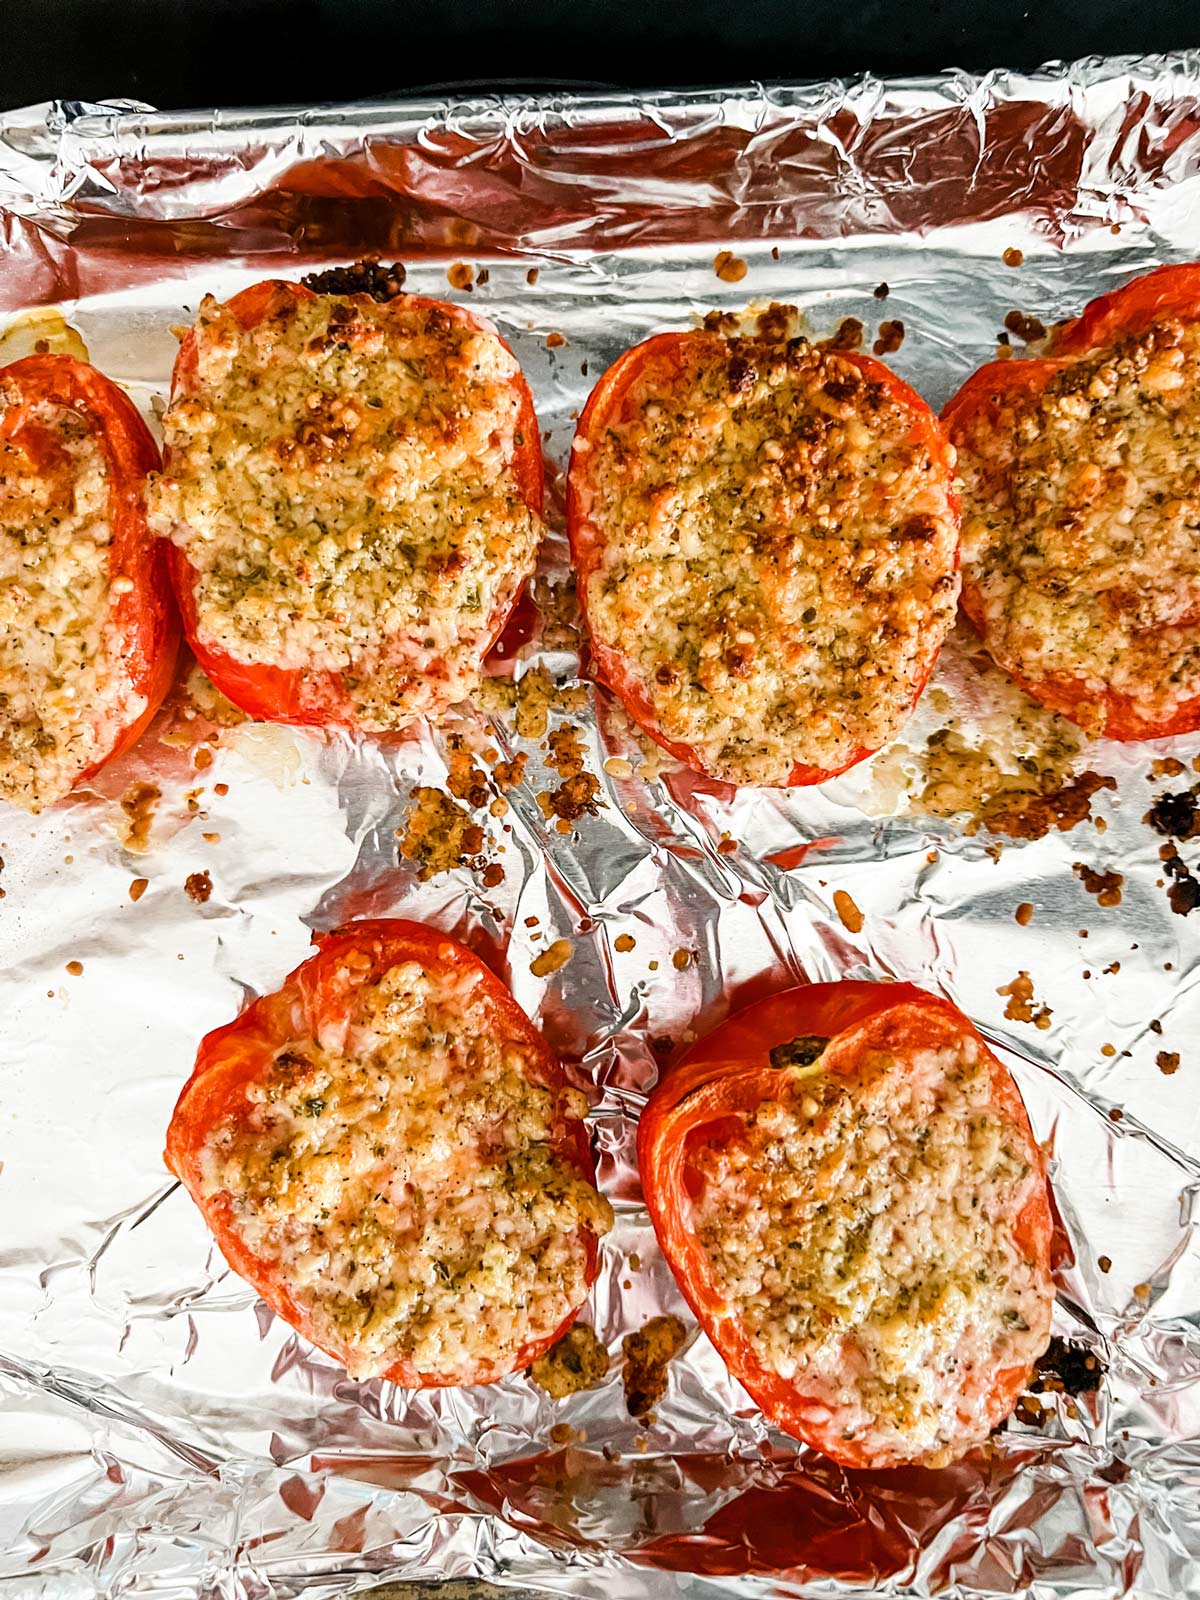 Parmesan, garlic and seasonings on top of broiled tomatoes on a foil lined sheet pan.